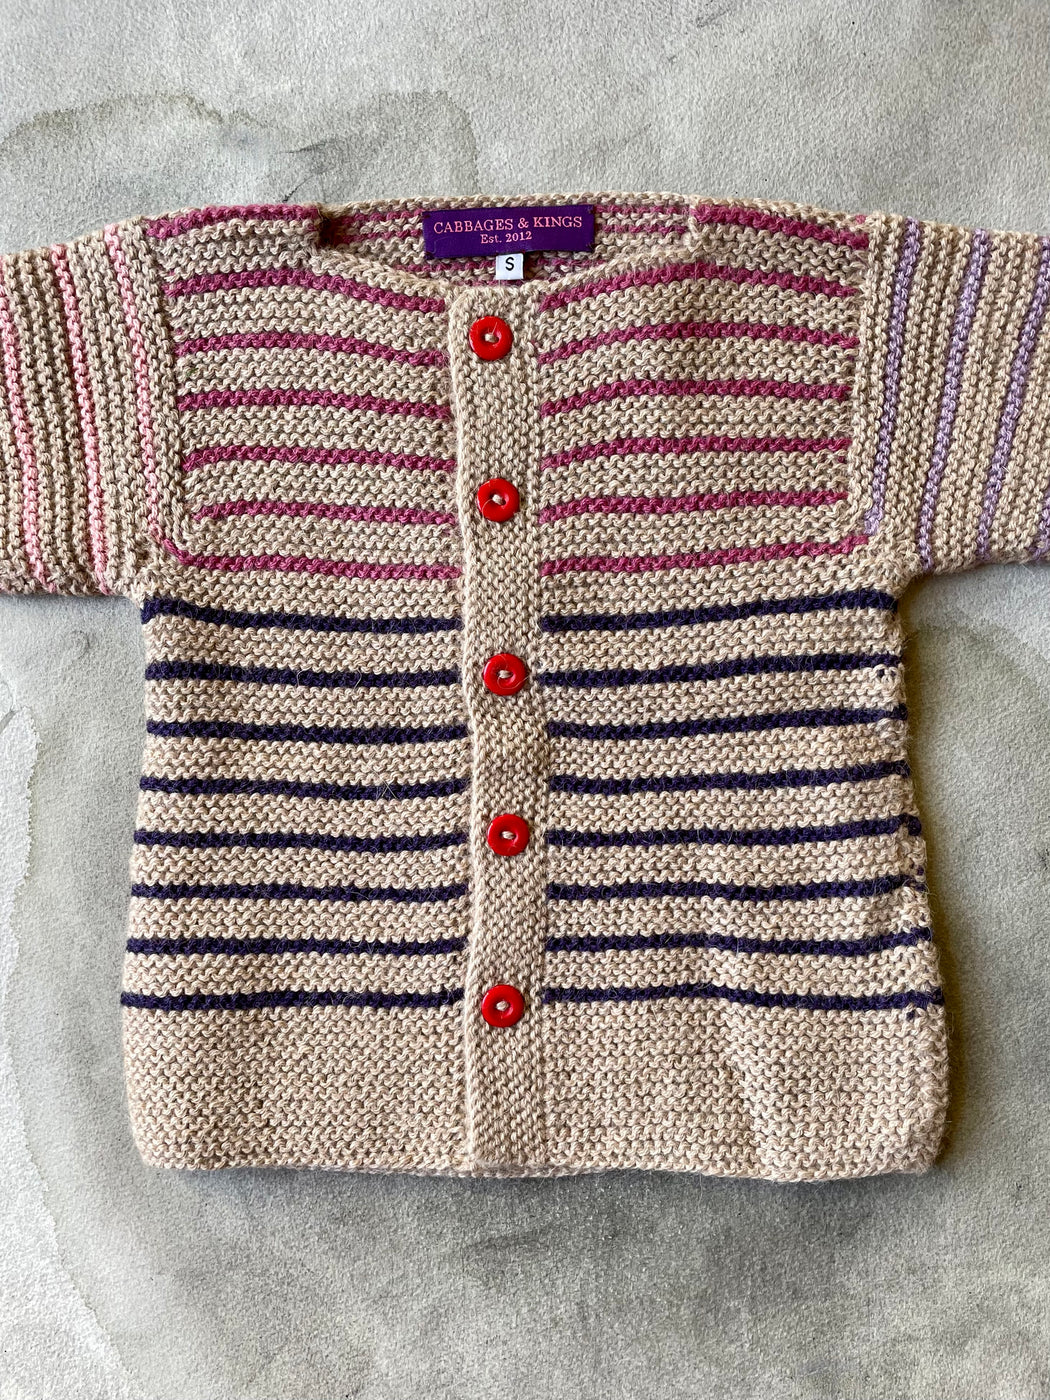 Cabbages & Kings "Rose Dreams" Sweater (1 - 2 years)